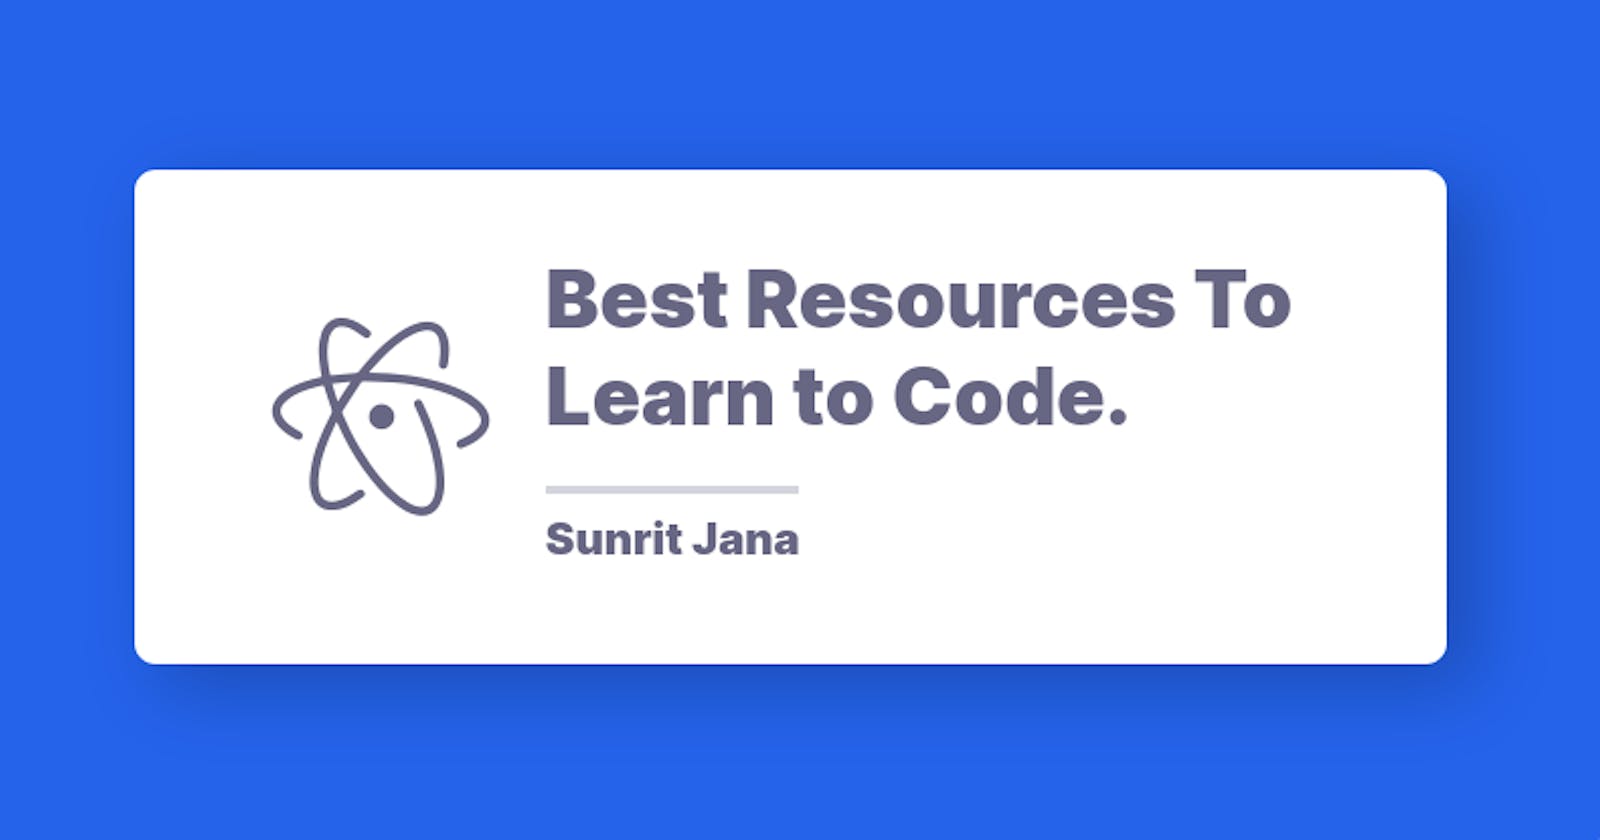 Best Resources To Learn to Code.